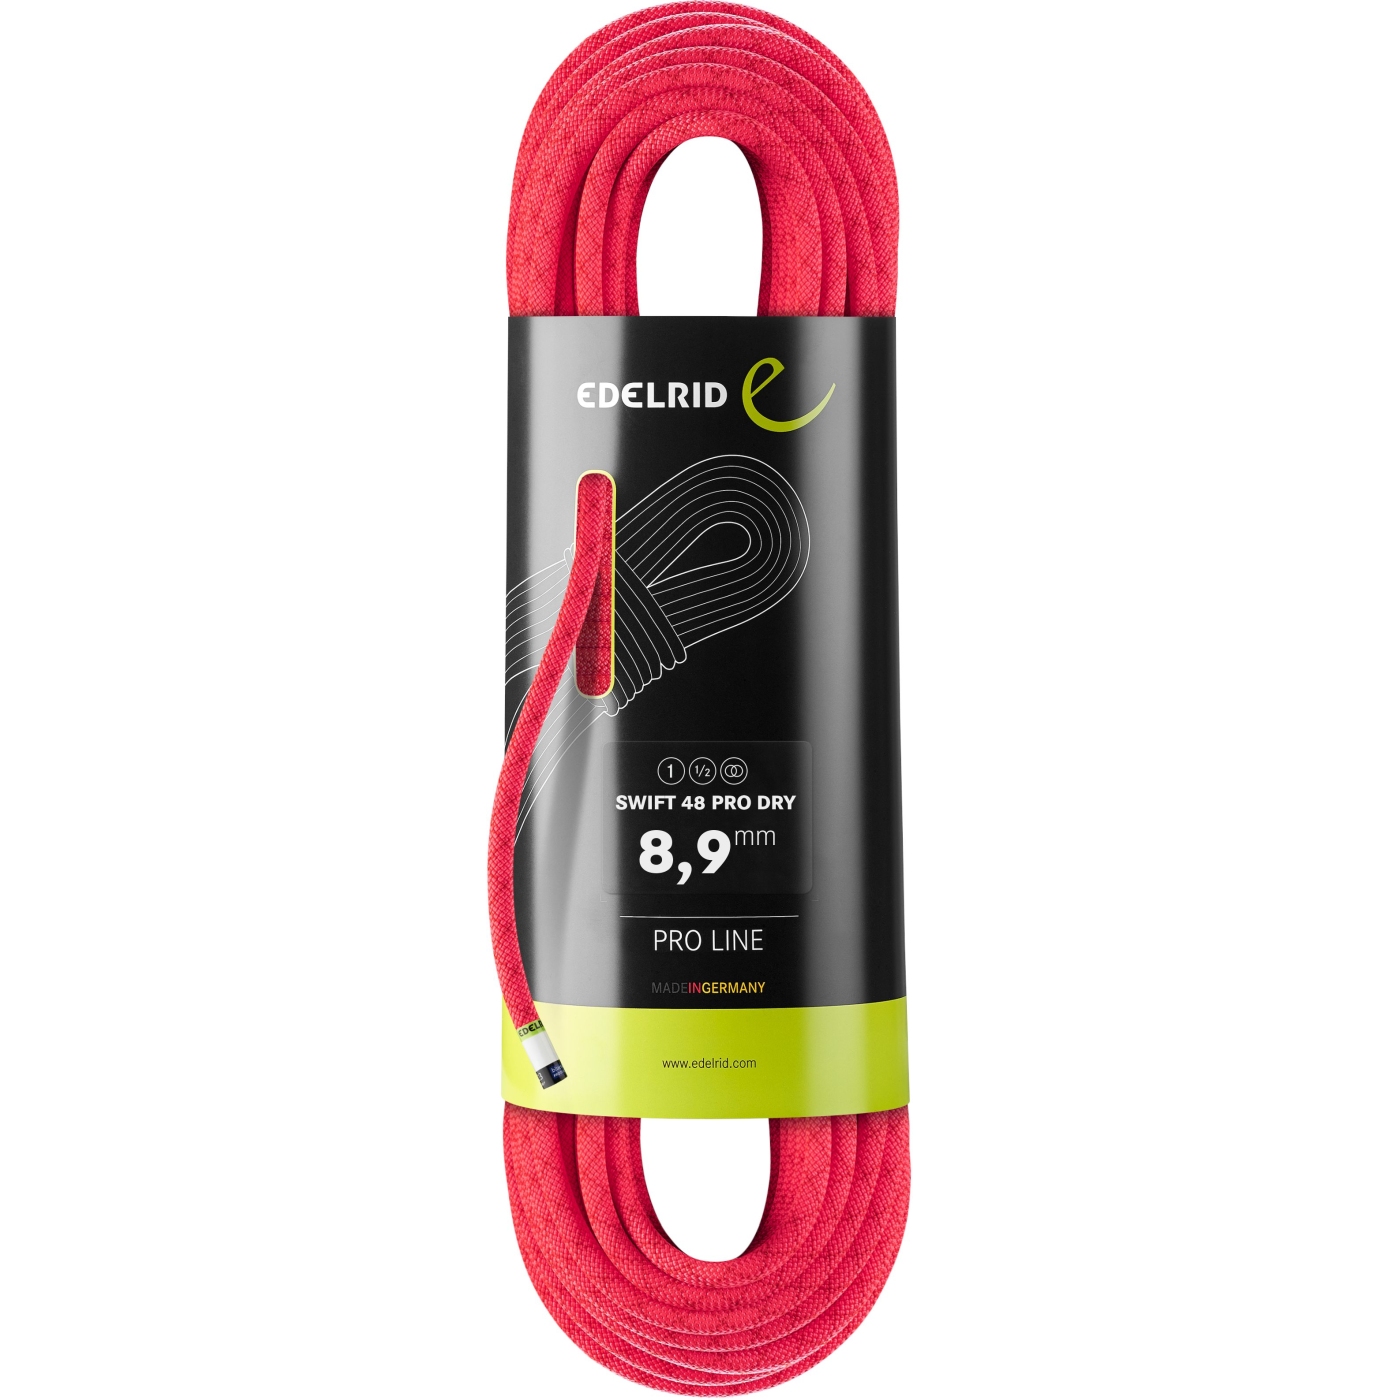 Image of Edelrid Swift 48 Pro Dry 8,9mm Rope - 60m - pink